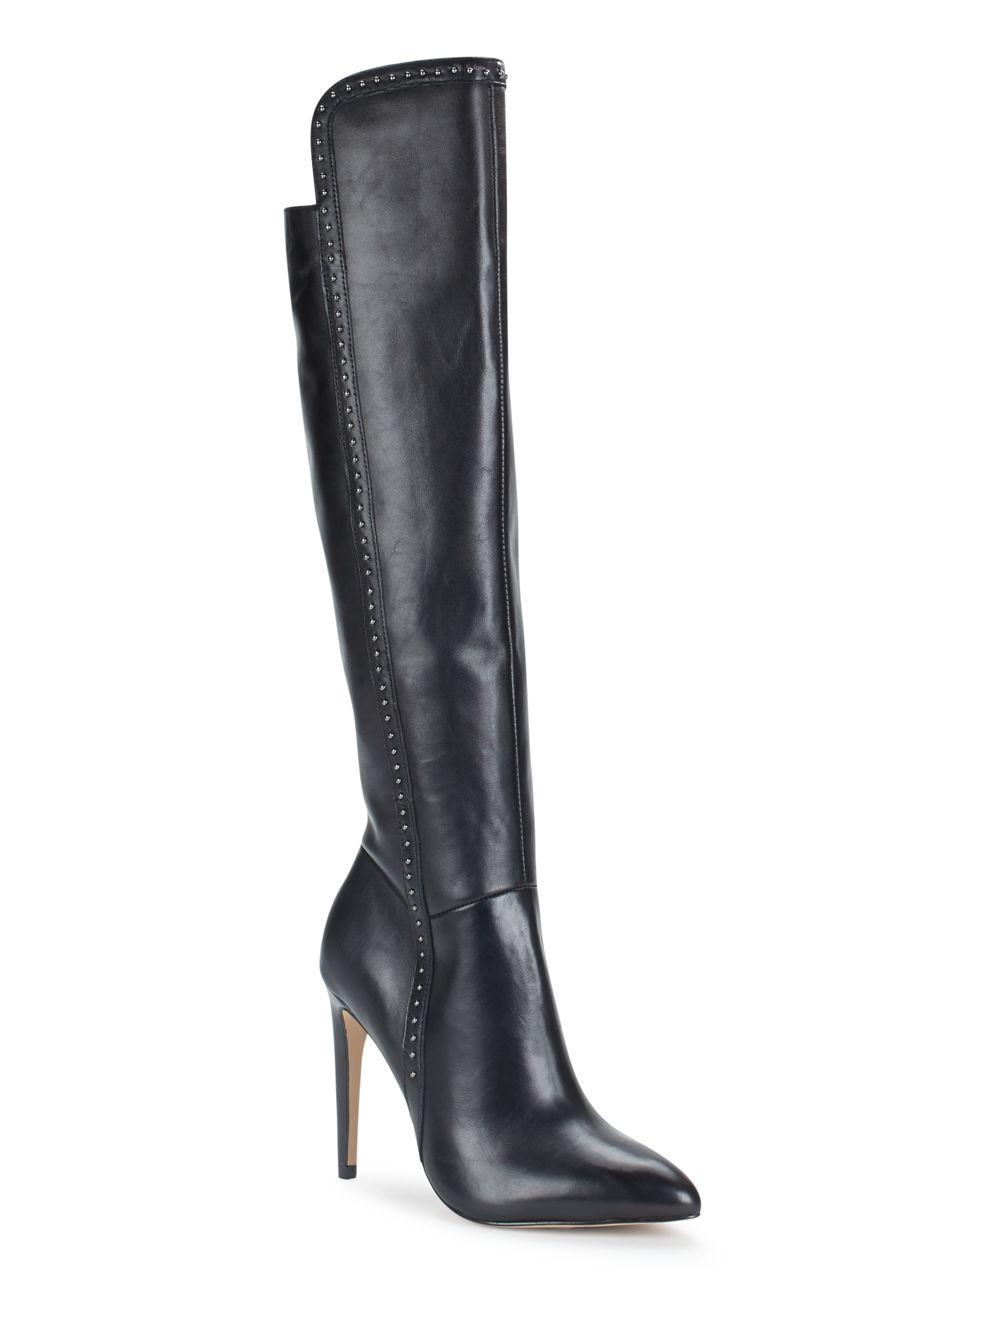 Saks Fifth Avenue Leather Point Toe Overtheknee Boots in